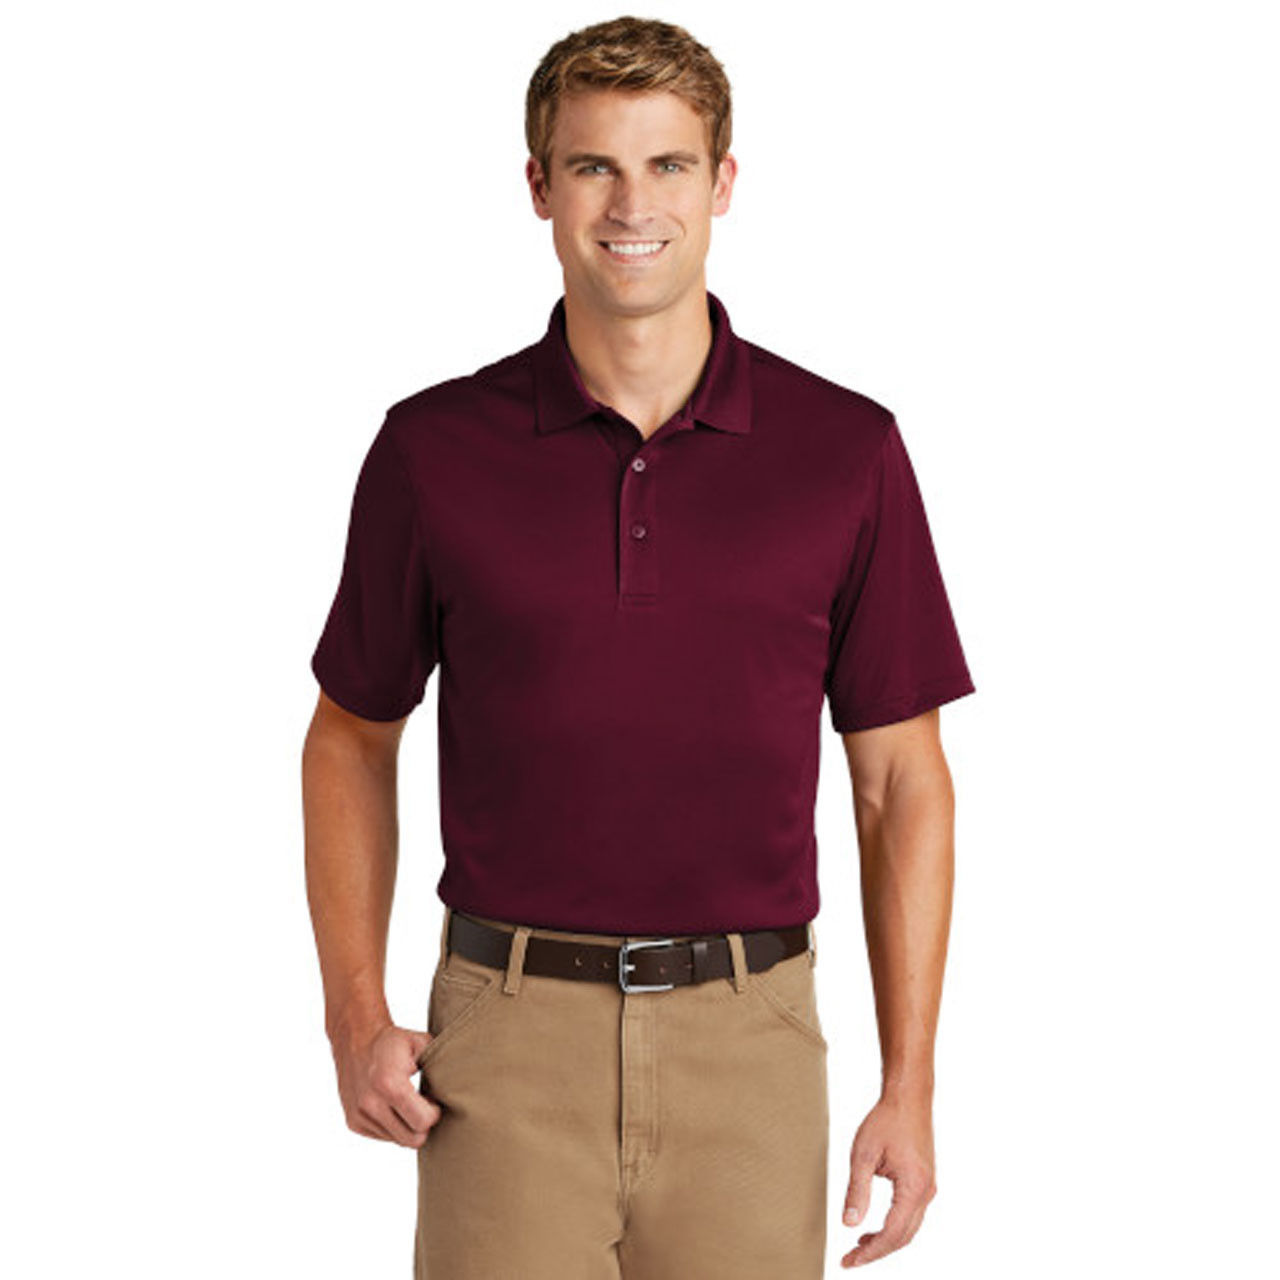 Can I purchase the men's maroon polo shirt in bulk?